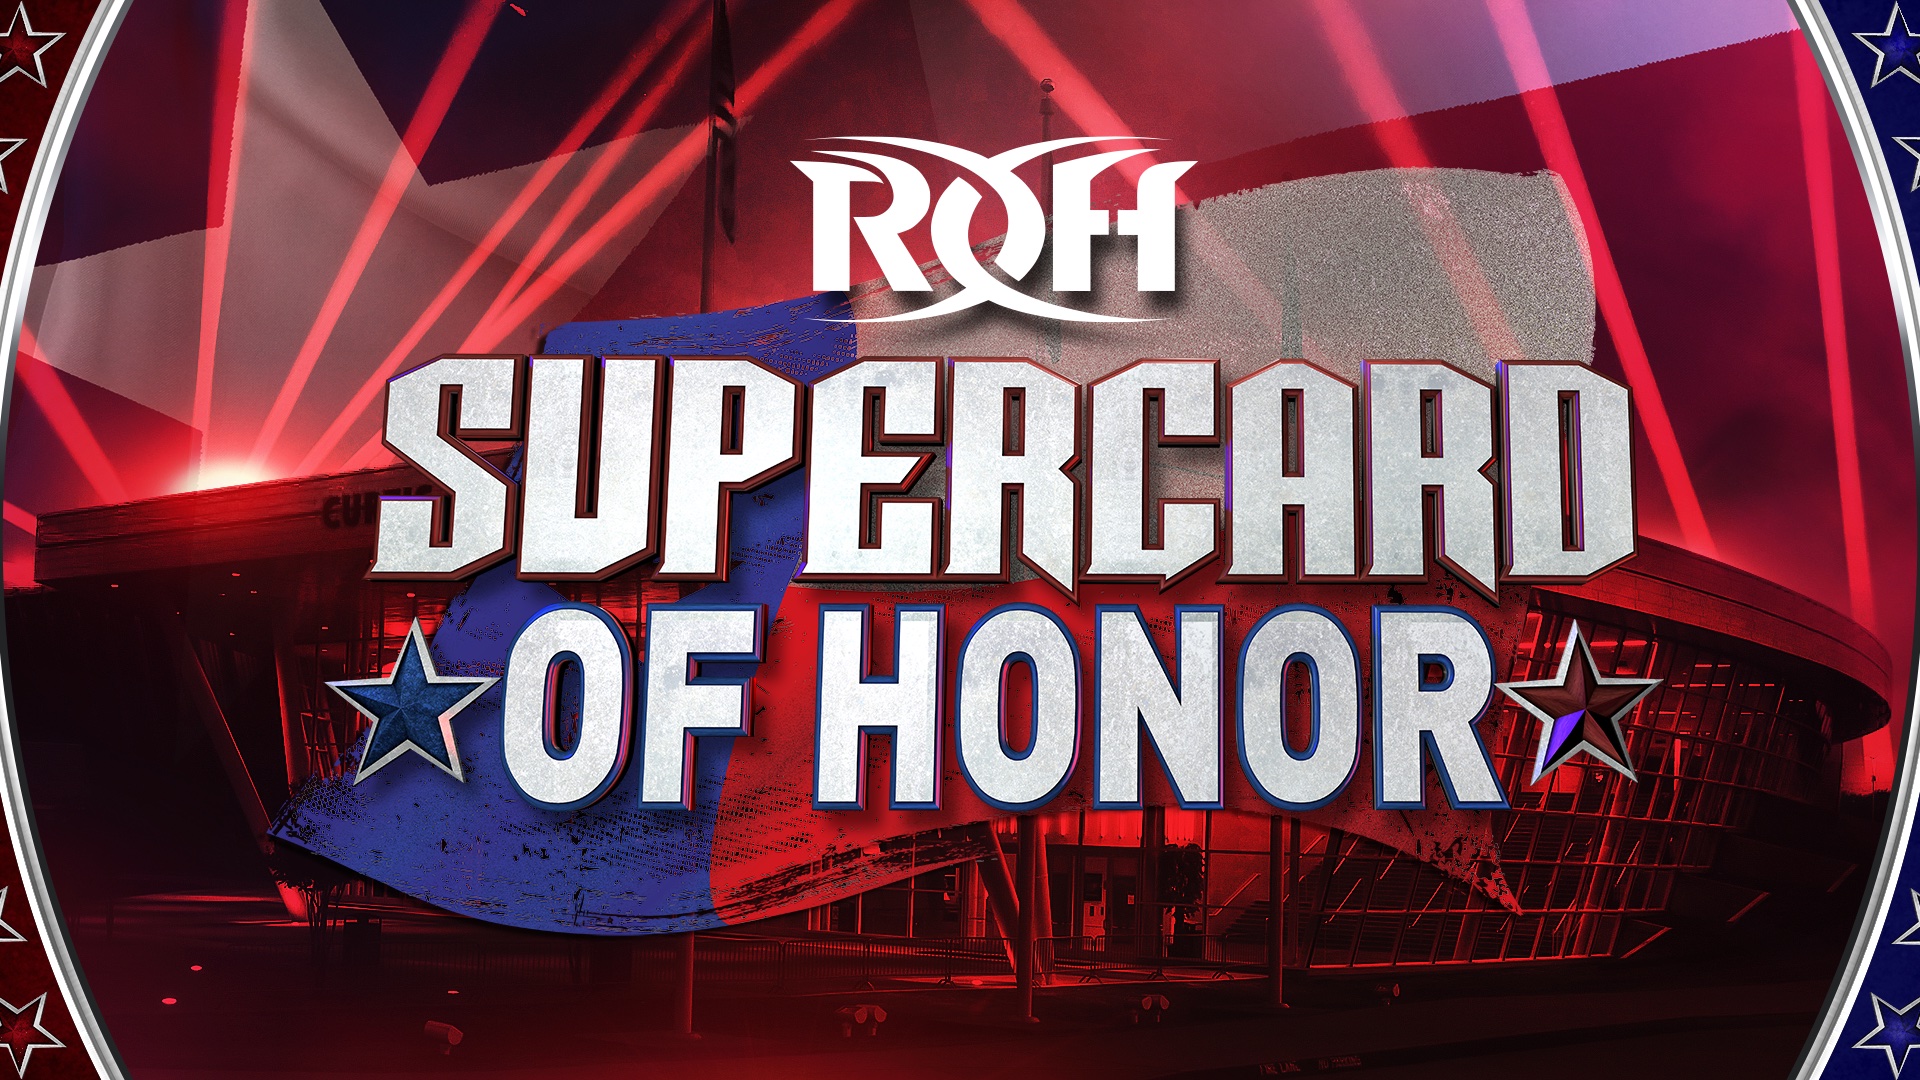 ROH Supercard of Honor Reportedly Generated Over 20,000 PPV Buys TPWW